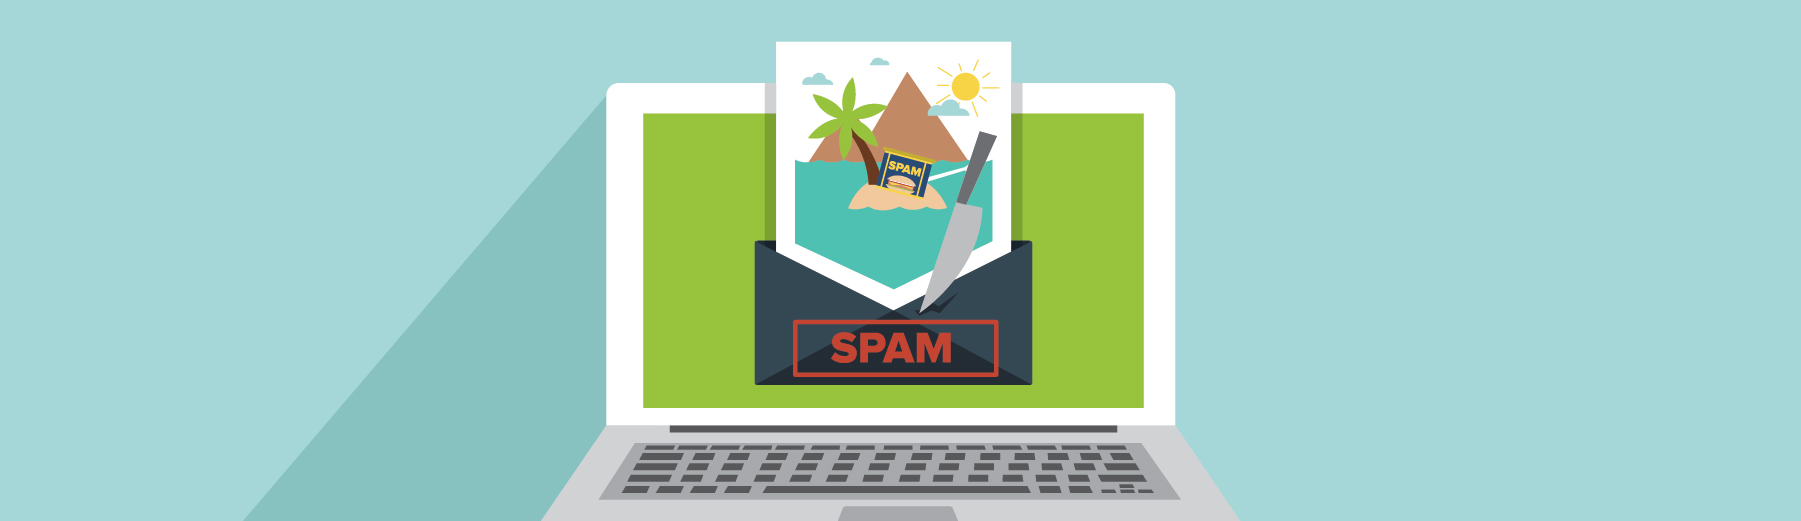 Make sure your email marketing rises above the spam folder.